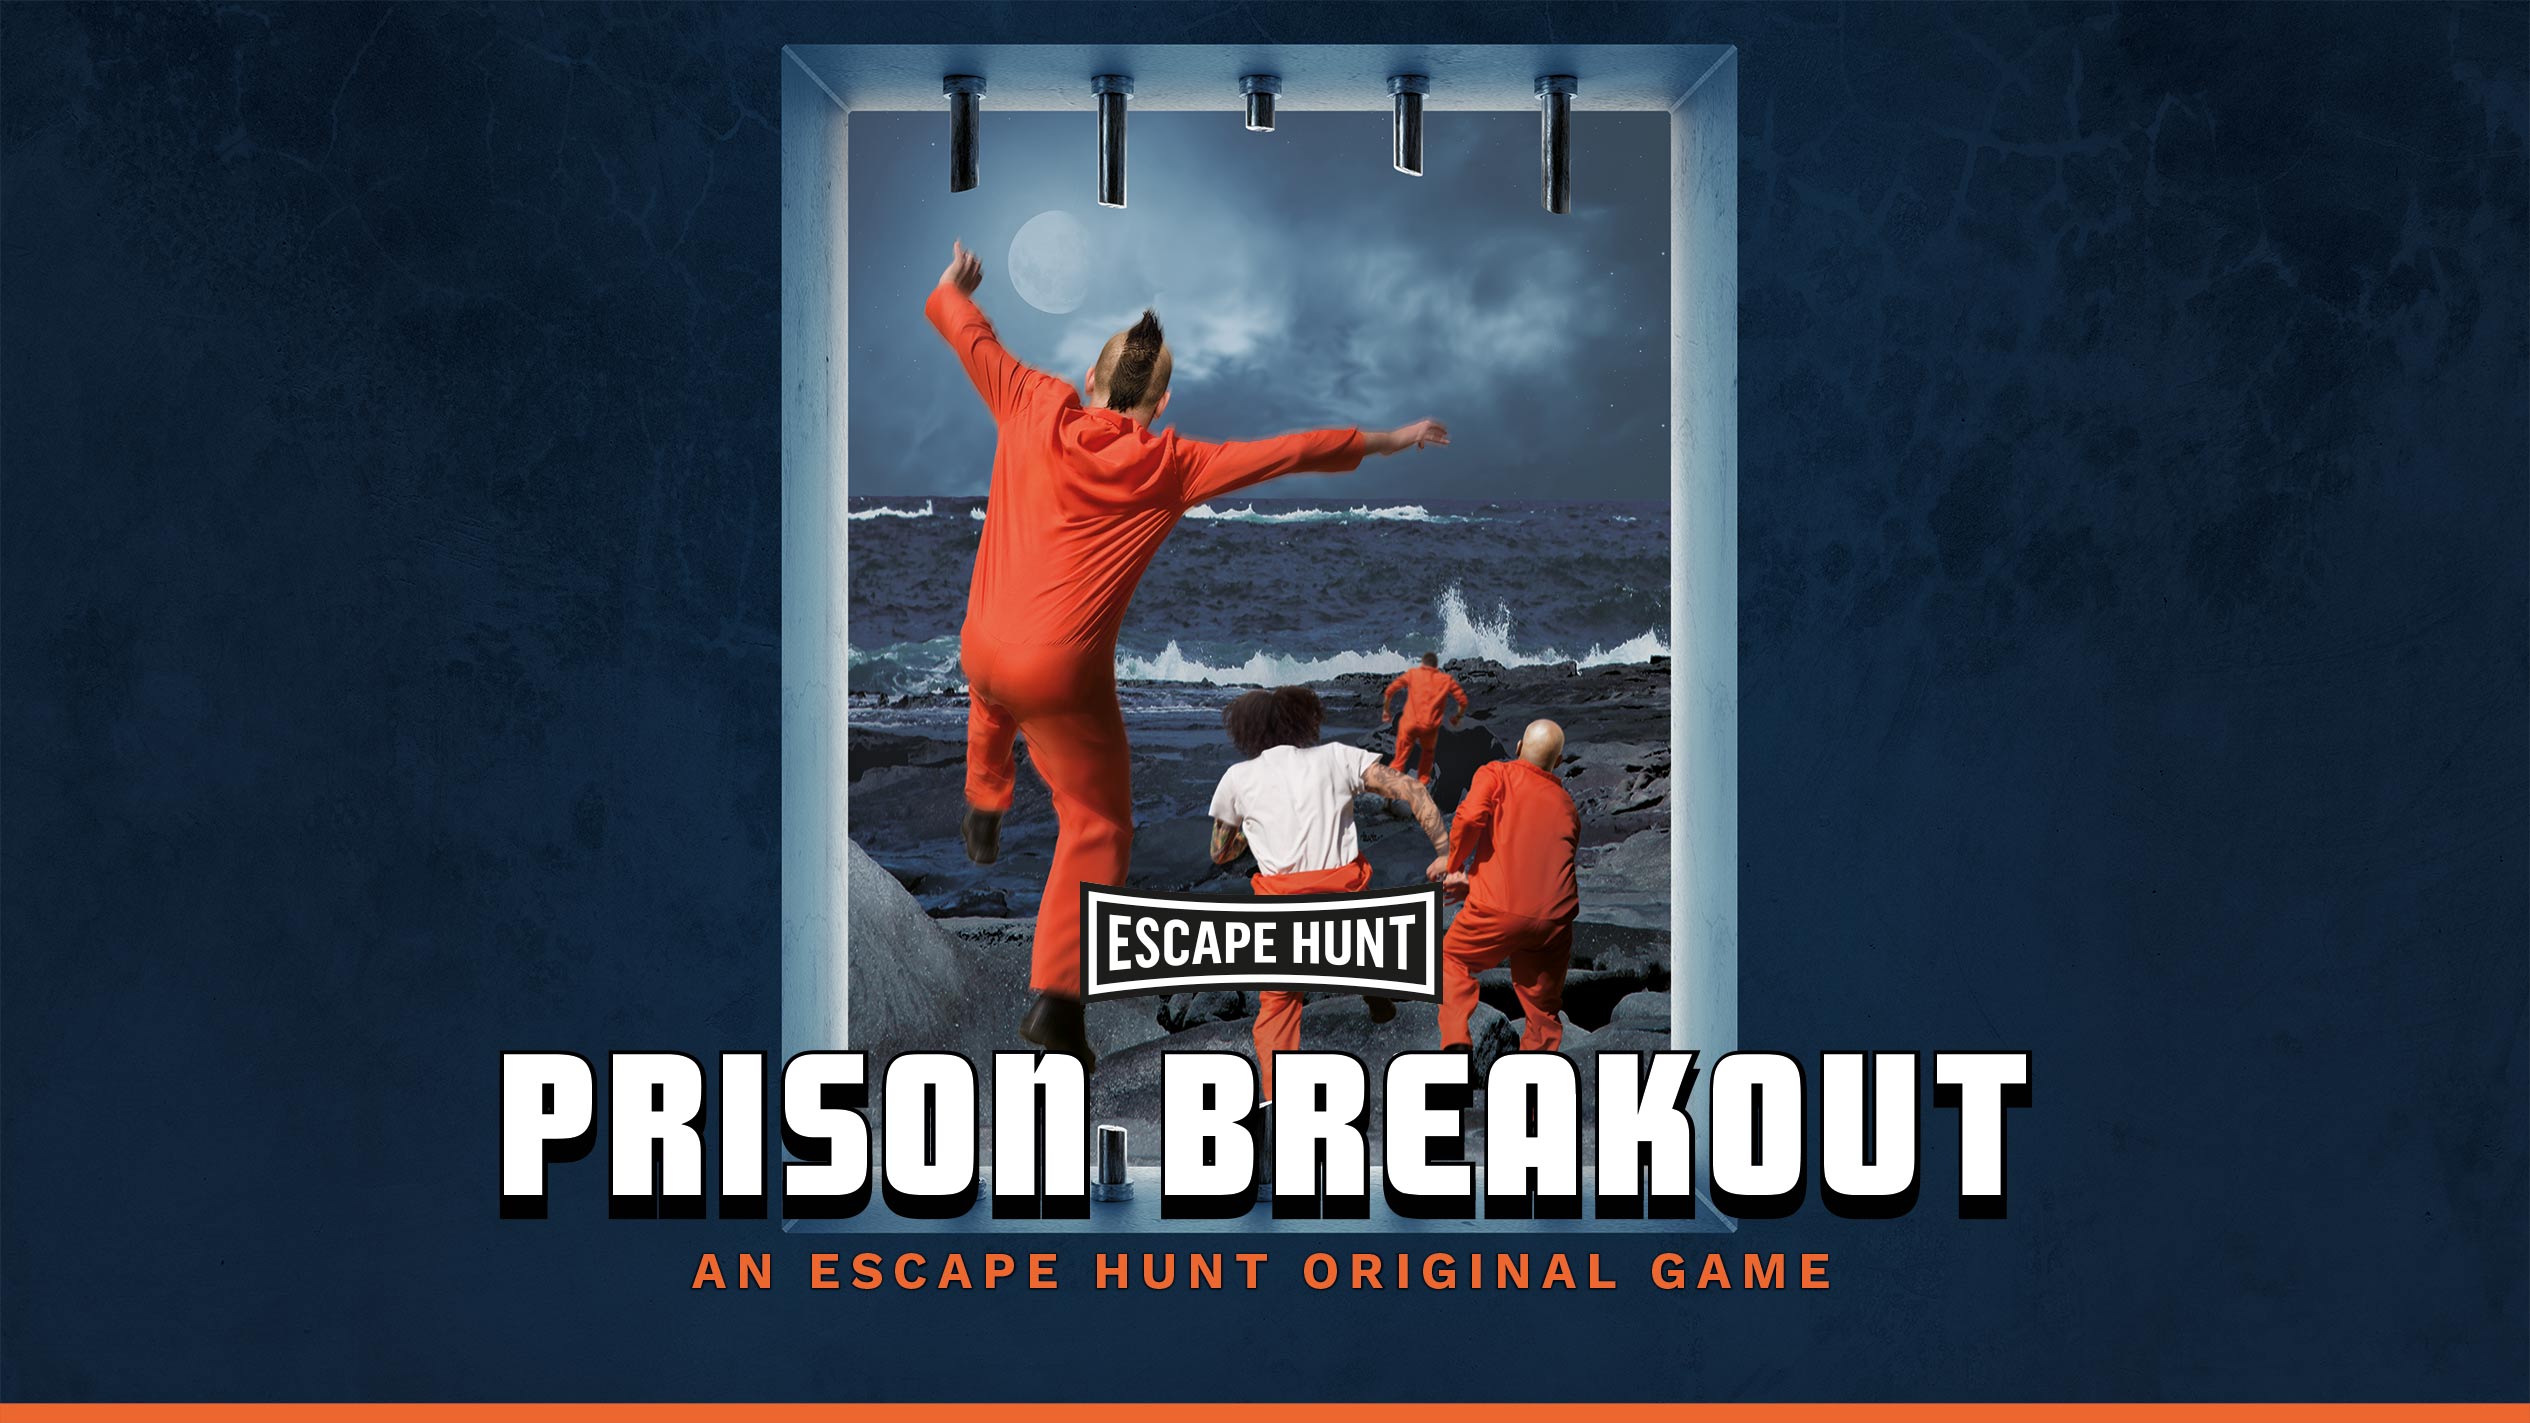 Escaping the Prison - Play Escaping the Prison on